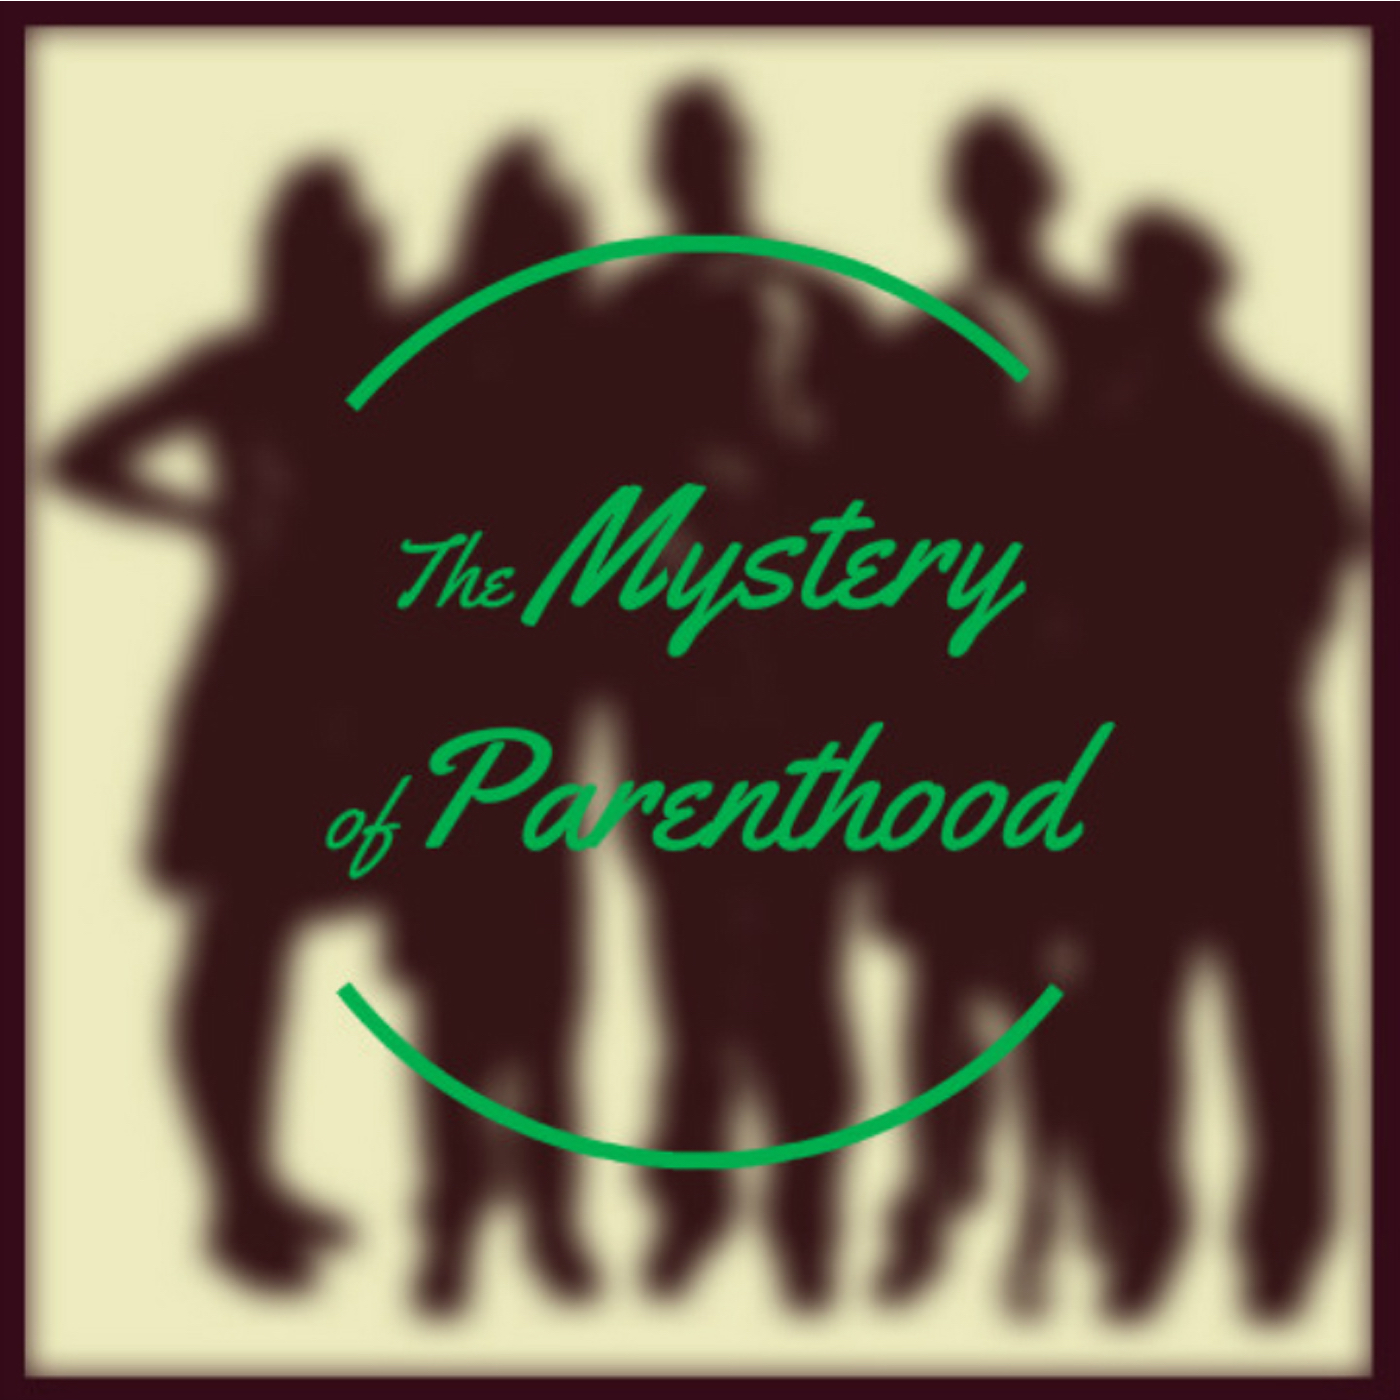 Mystery of Parenthood, February 22, 2017